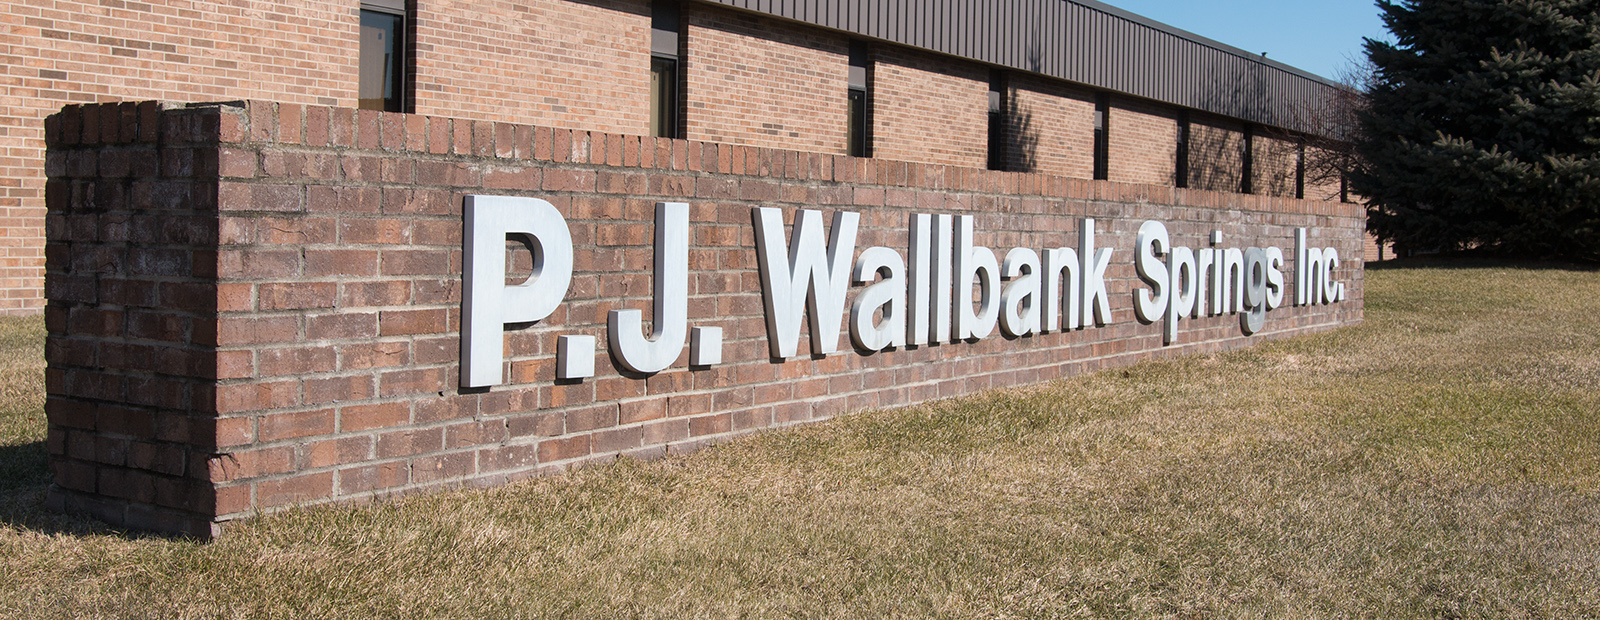 P.J. Wallbank Springs is planning to double in size.